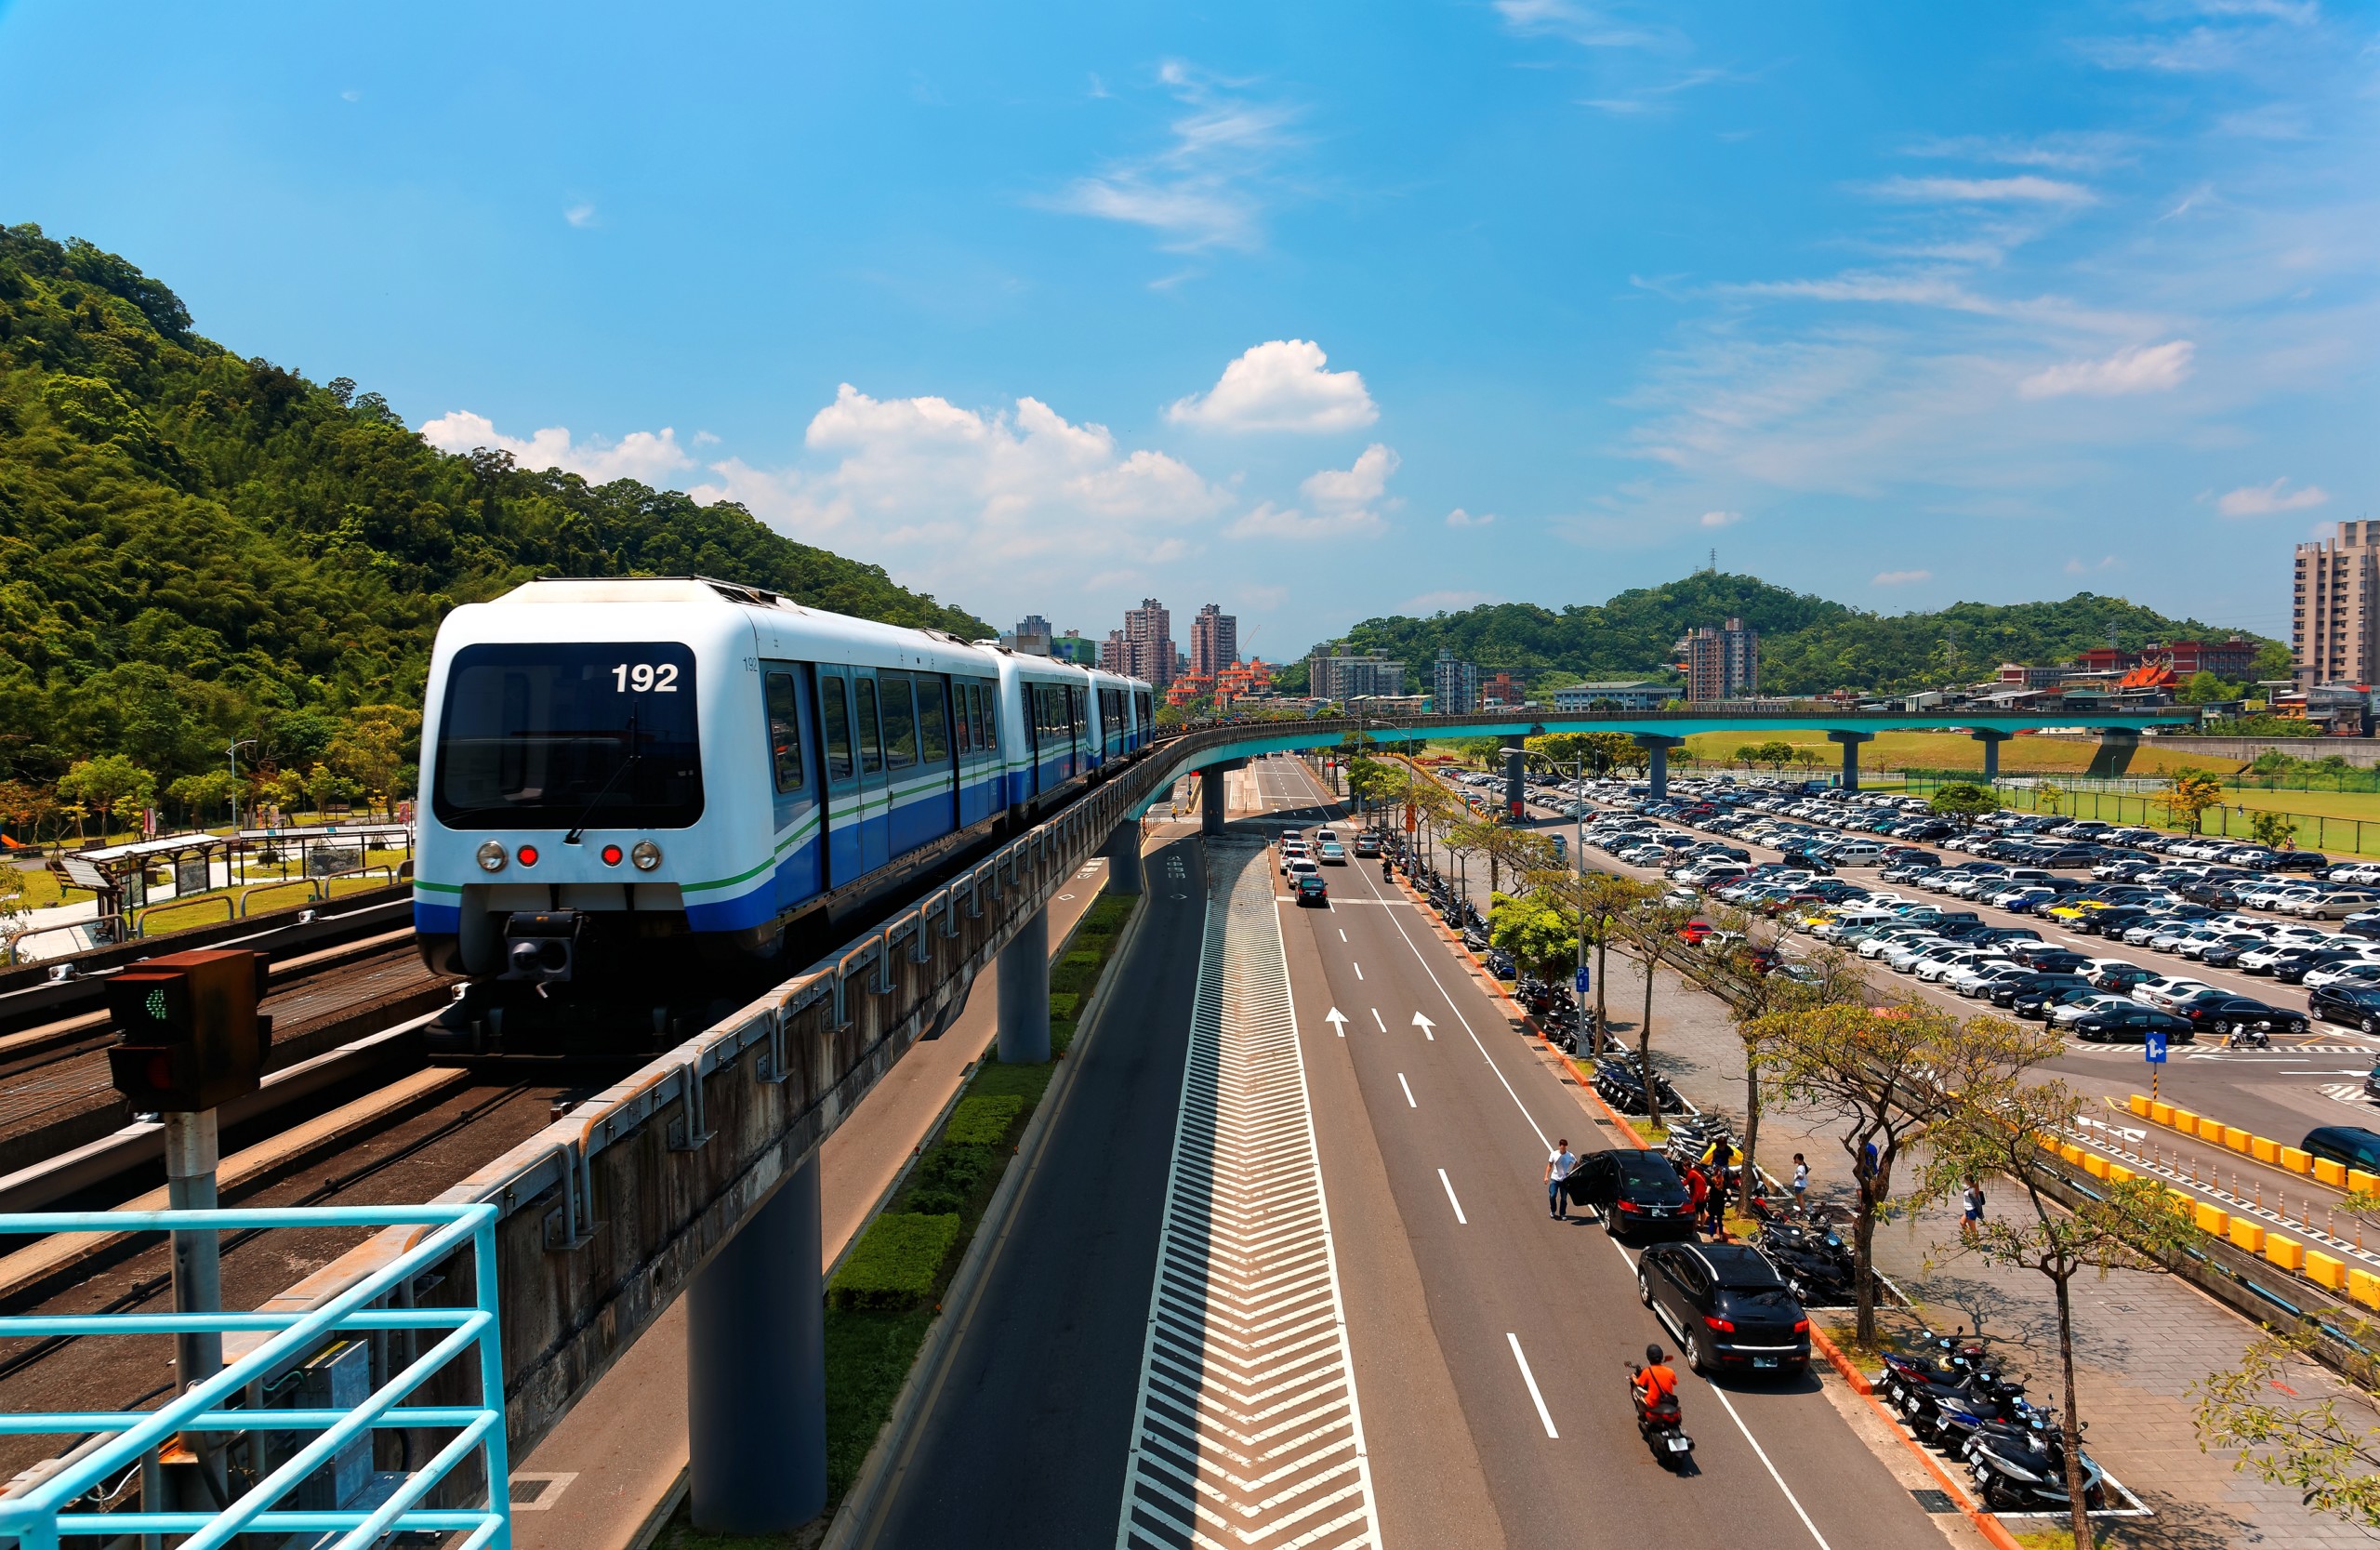 View of a train traveling on elevated rails of Taipei Metro System in suburban area under blue clear sky ~ View of railways in Mucha, Taipei, the capital city of Taiwan, on a beautiful sunny day